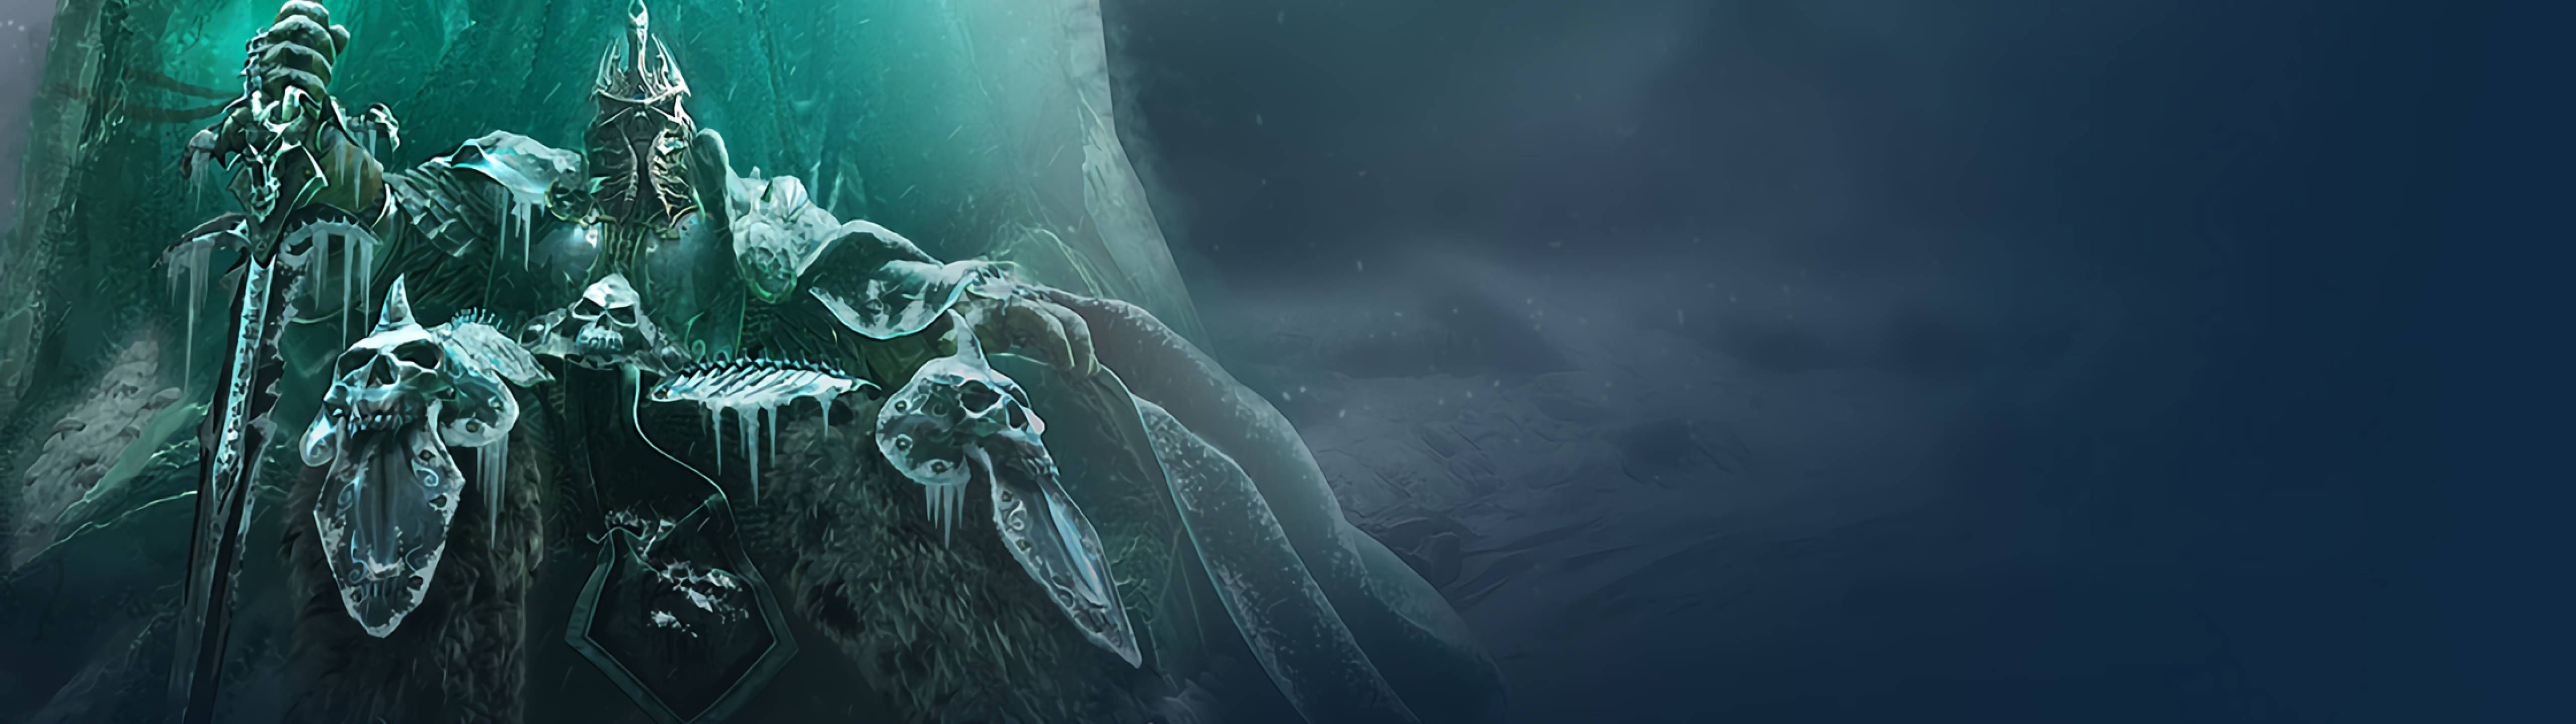 Download 5120x1440 Game Lich King